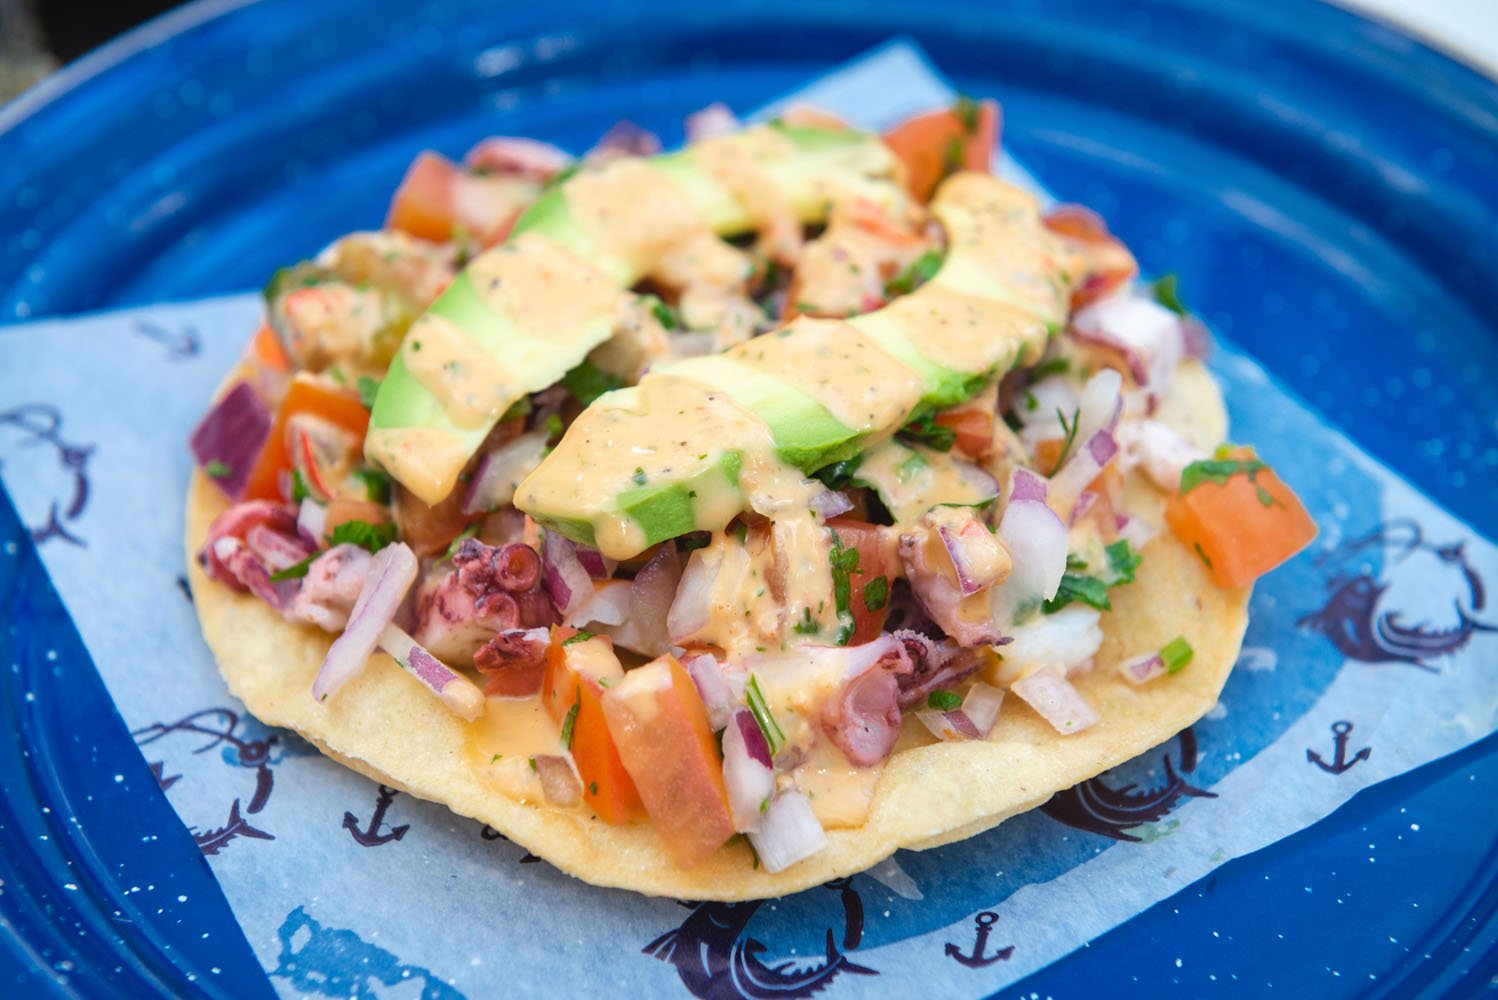 A close-up of a colorful ceviche tostada topped with fresh avocado, diced tomatoes, onions, and a zesty sauce, served on a blue plate with nautical designs.